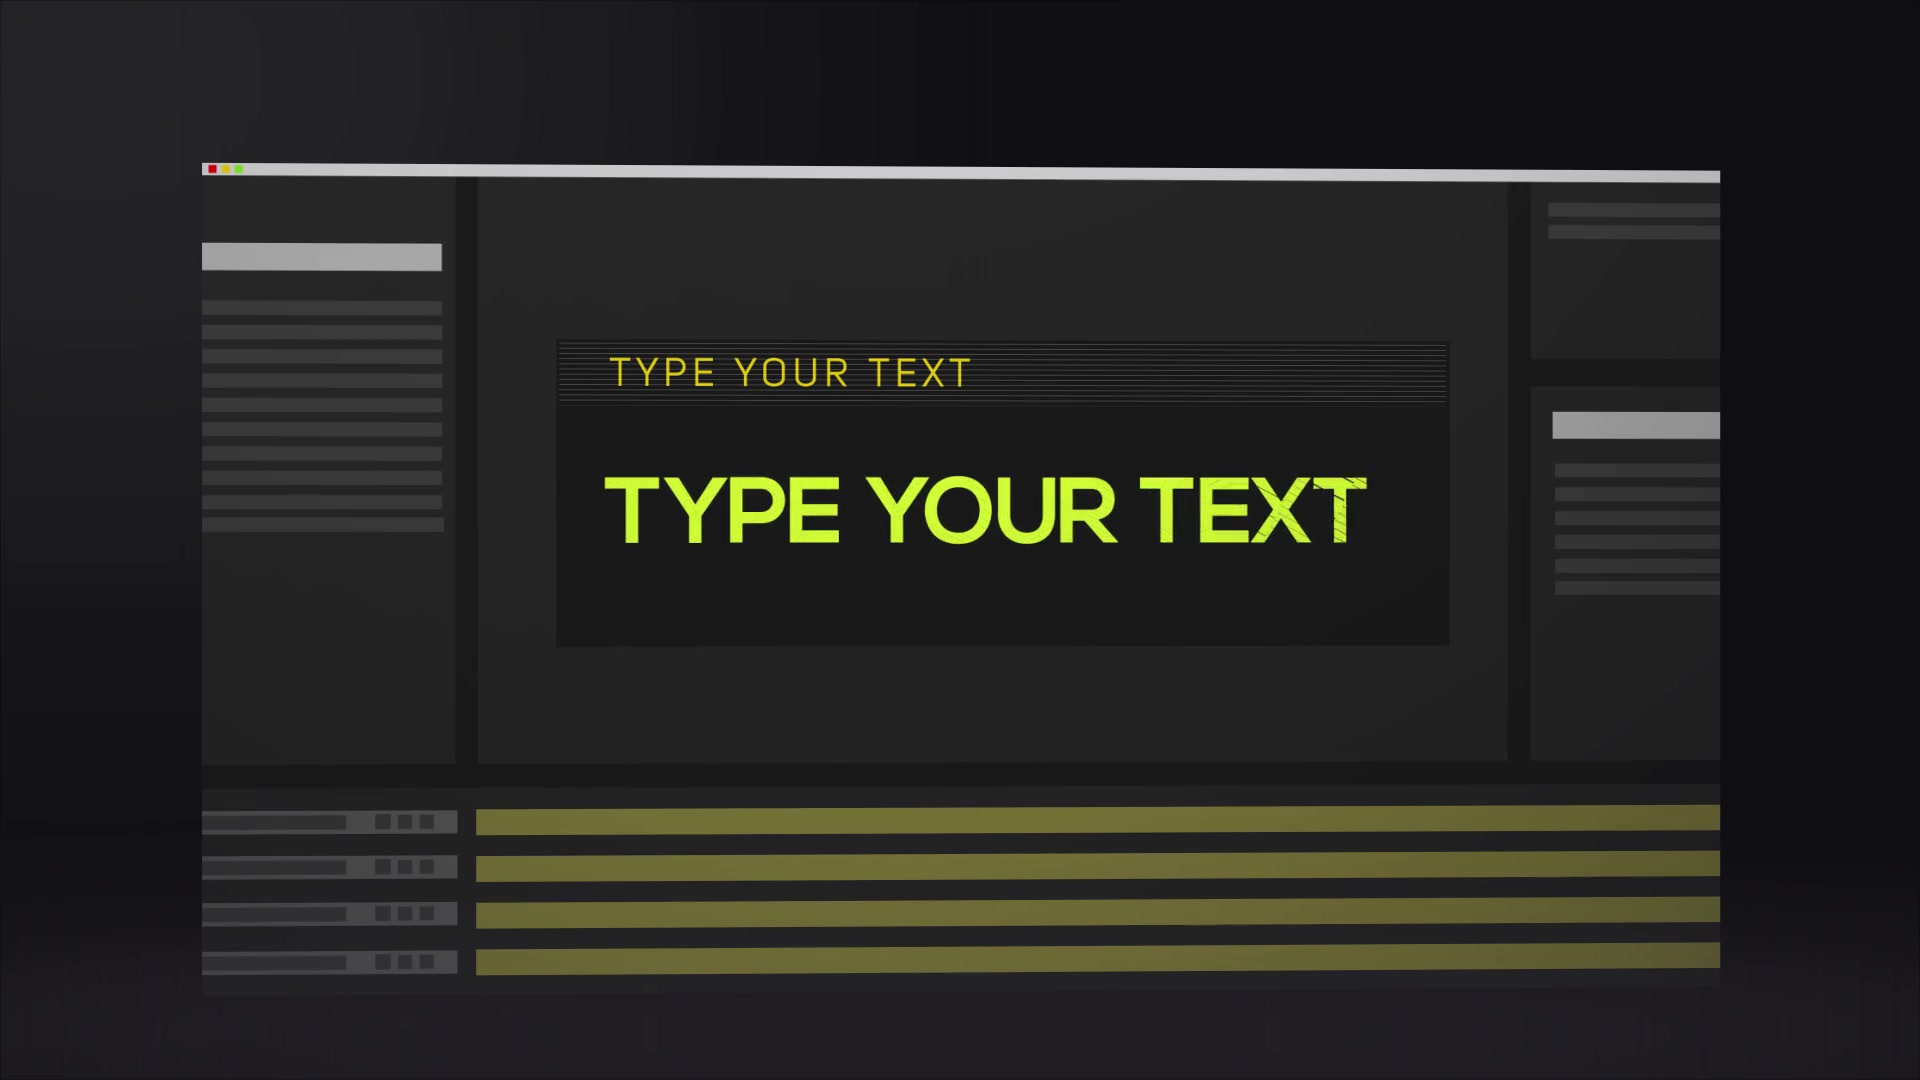 Motion Text Creator - Download Videohive 19078008